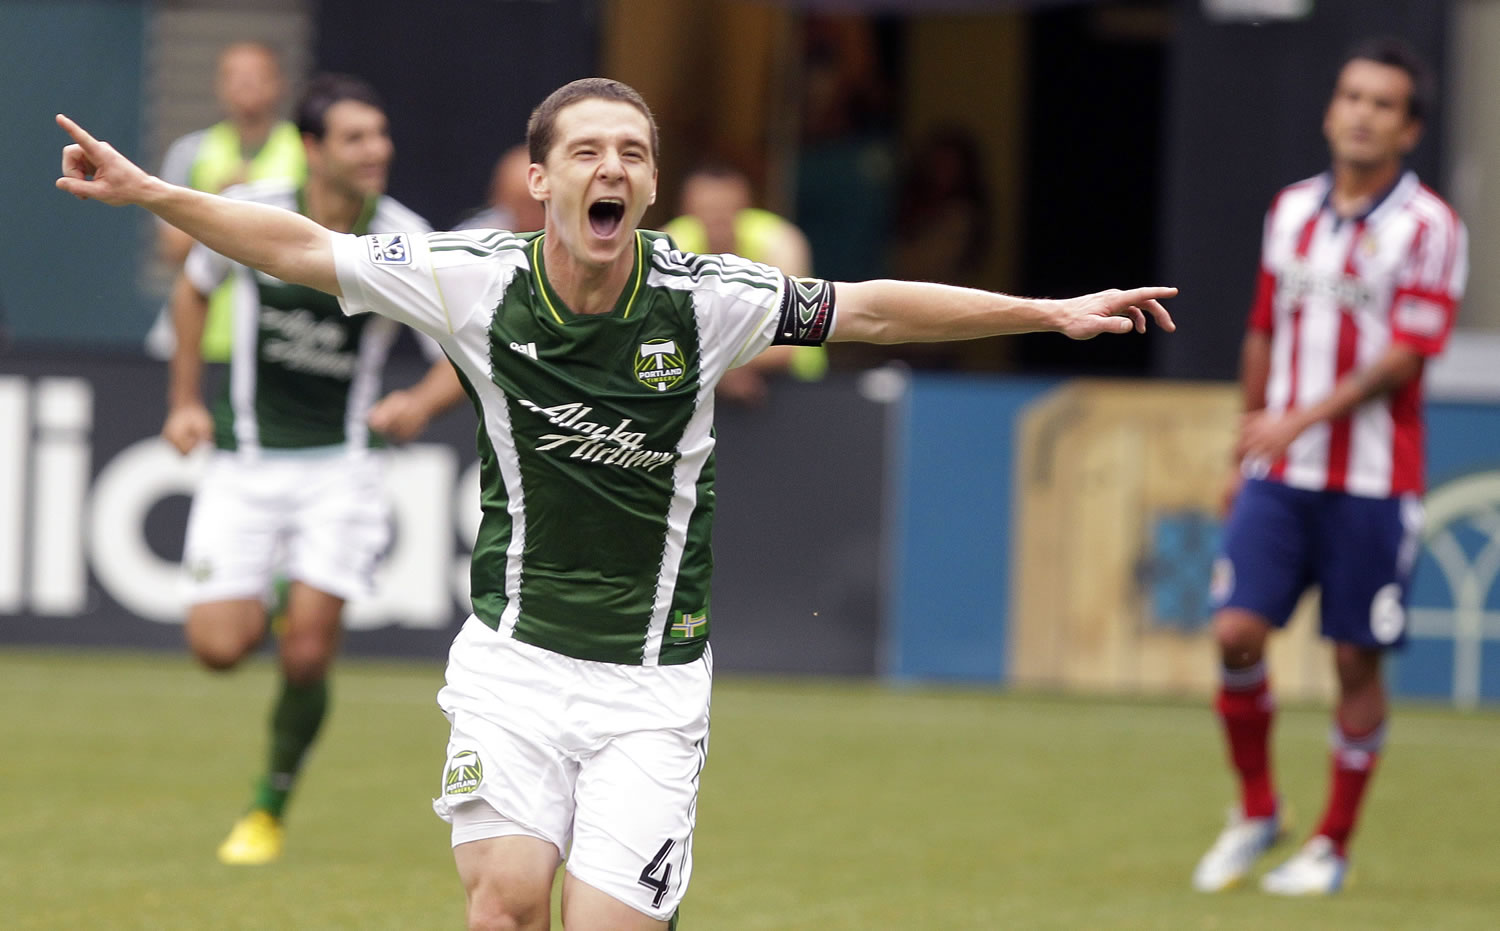 Will Johnson was traded Friday to Toronto FC after three seasons with the Timbers.